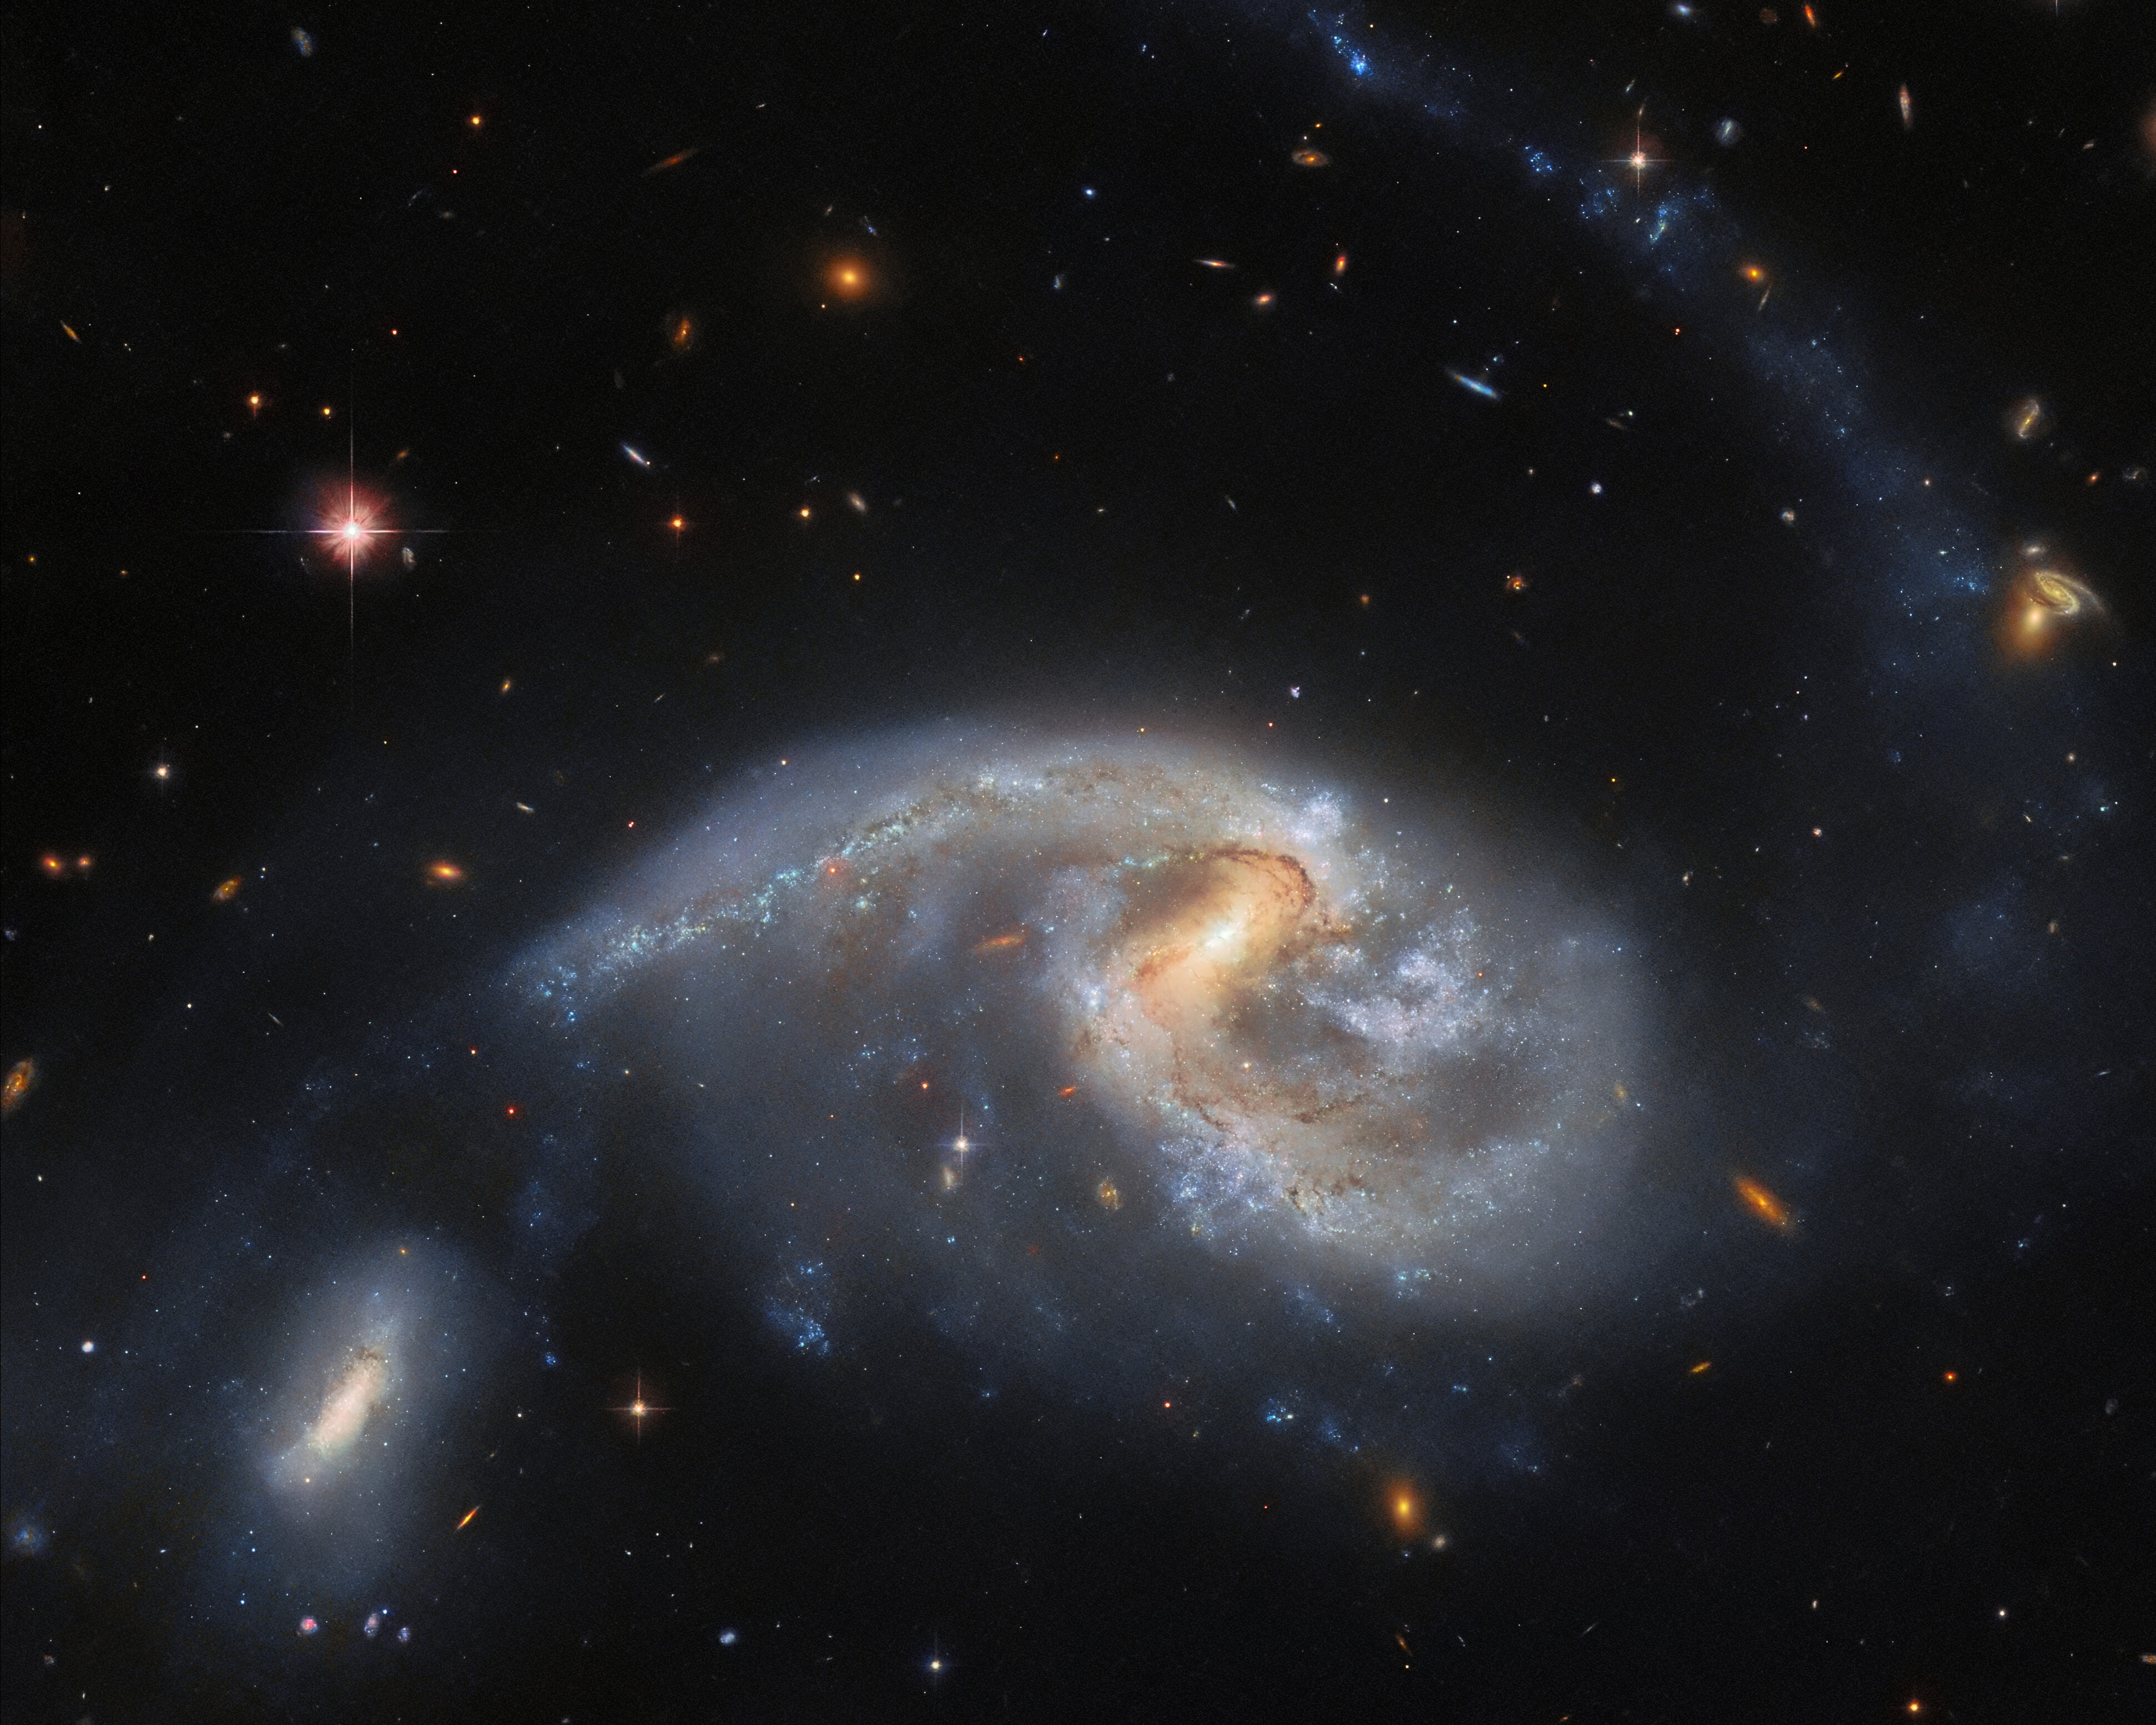 A large spiral galaxy with a smaller neighboring galaxy. The spiral galaxy is wide and distorted, with colorful dust. Its companion lies close by, at the end of a spiral arm, to the lower left. A long, faint tail of stars reaches up from the right side of the spiral galaxy to the top of the image. Several small, distant galaxies are visible in the background, along with one bright star in the foreground.